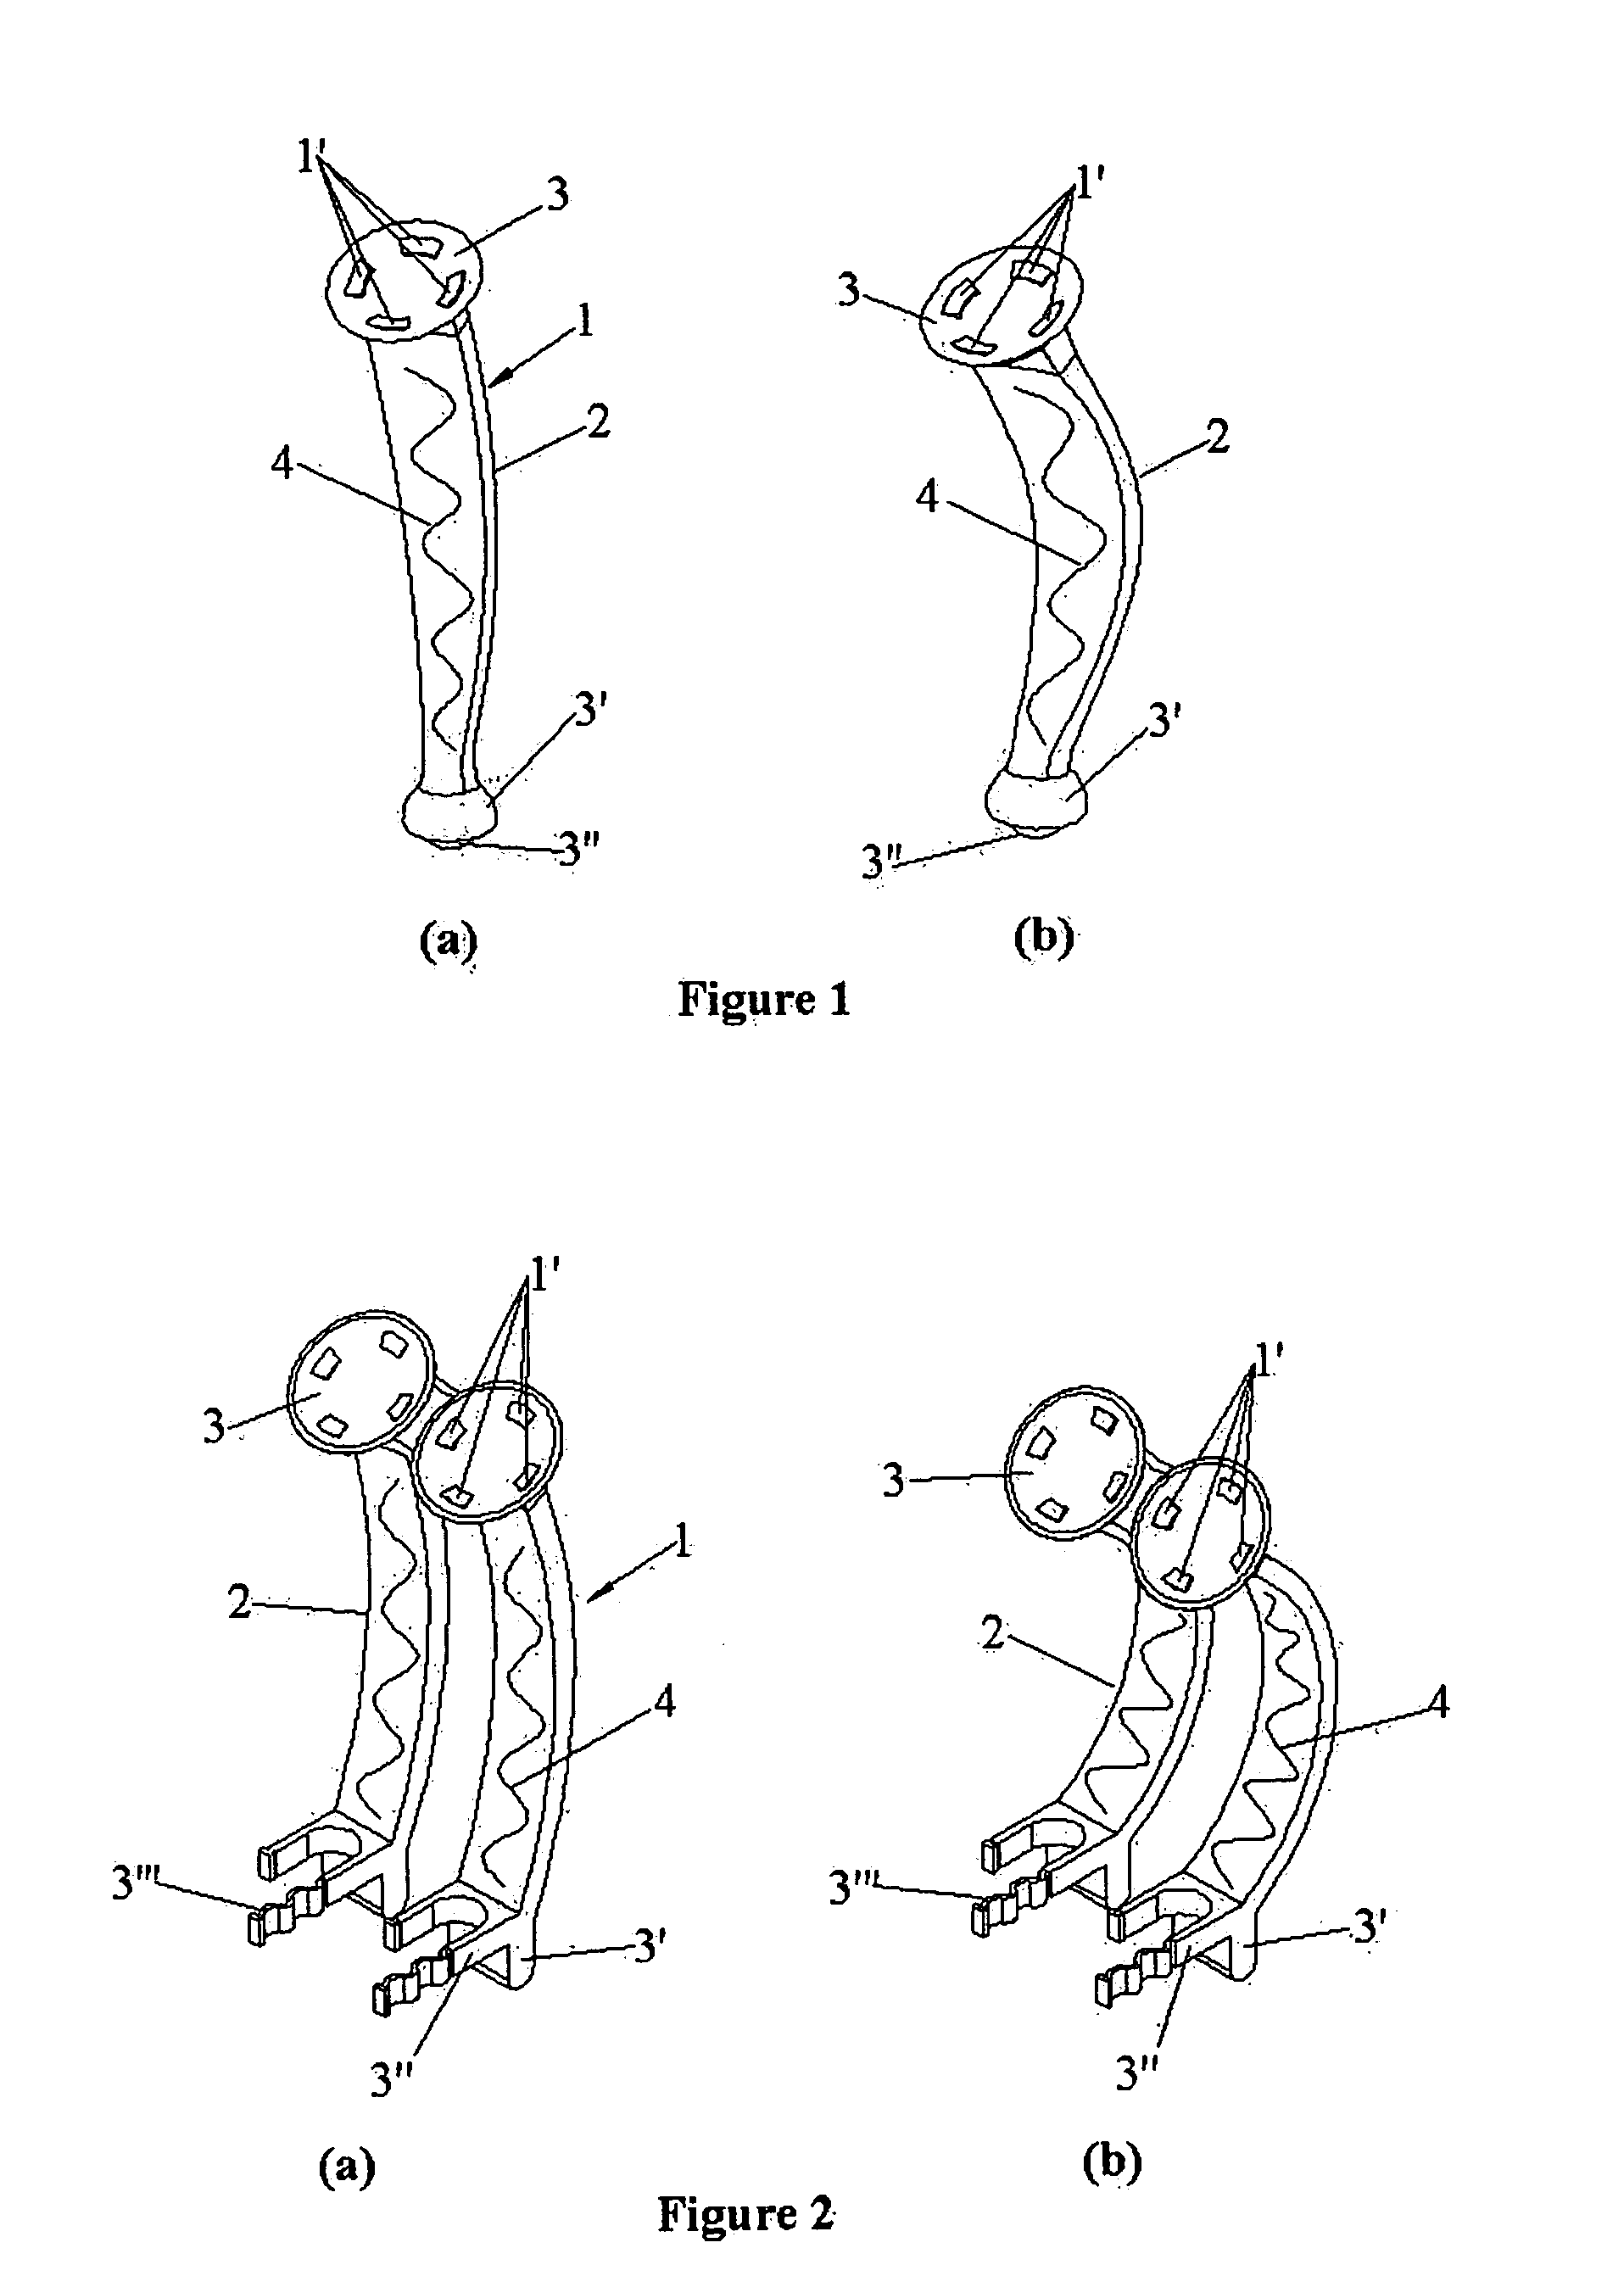 Backpack support apparatus